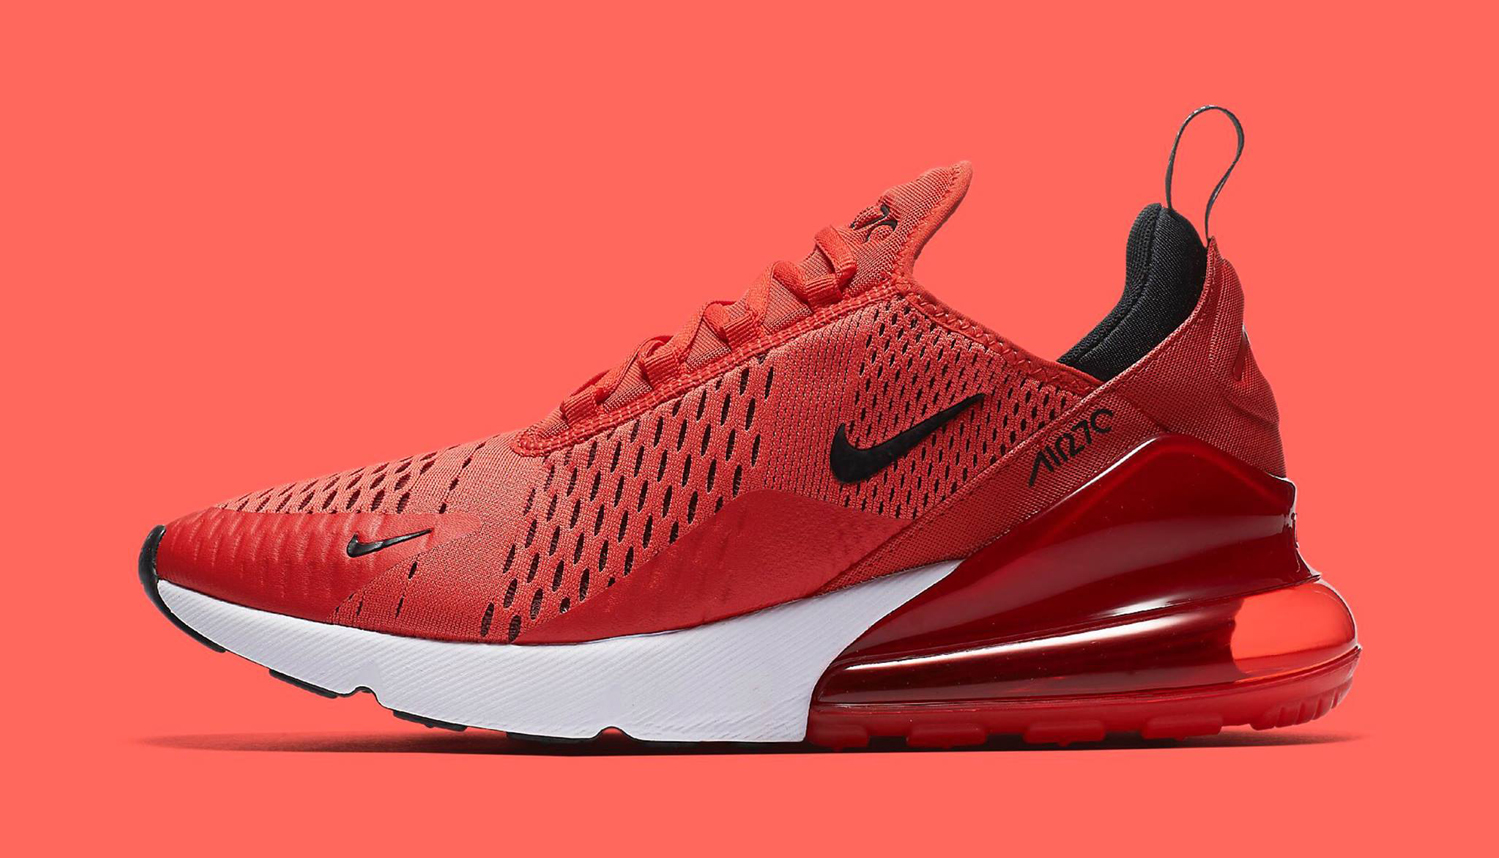 Nike Air Max 270 Habanero Red Available Now